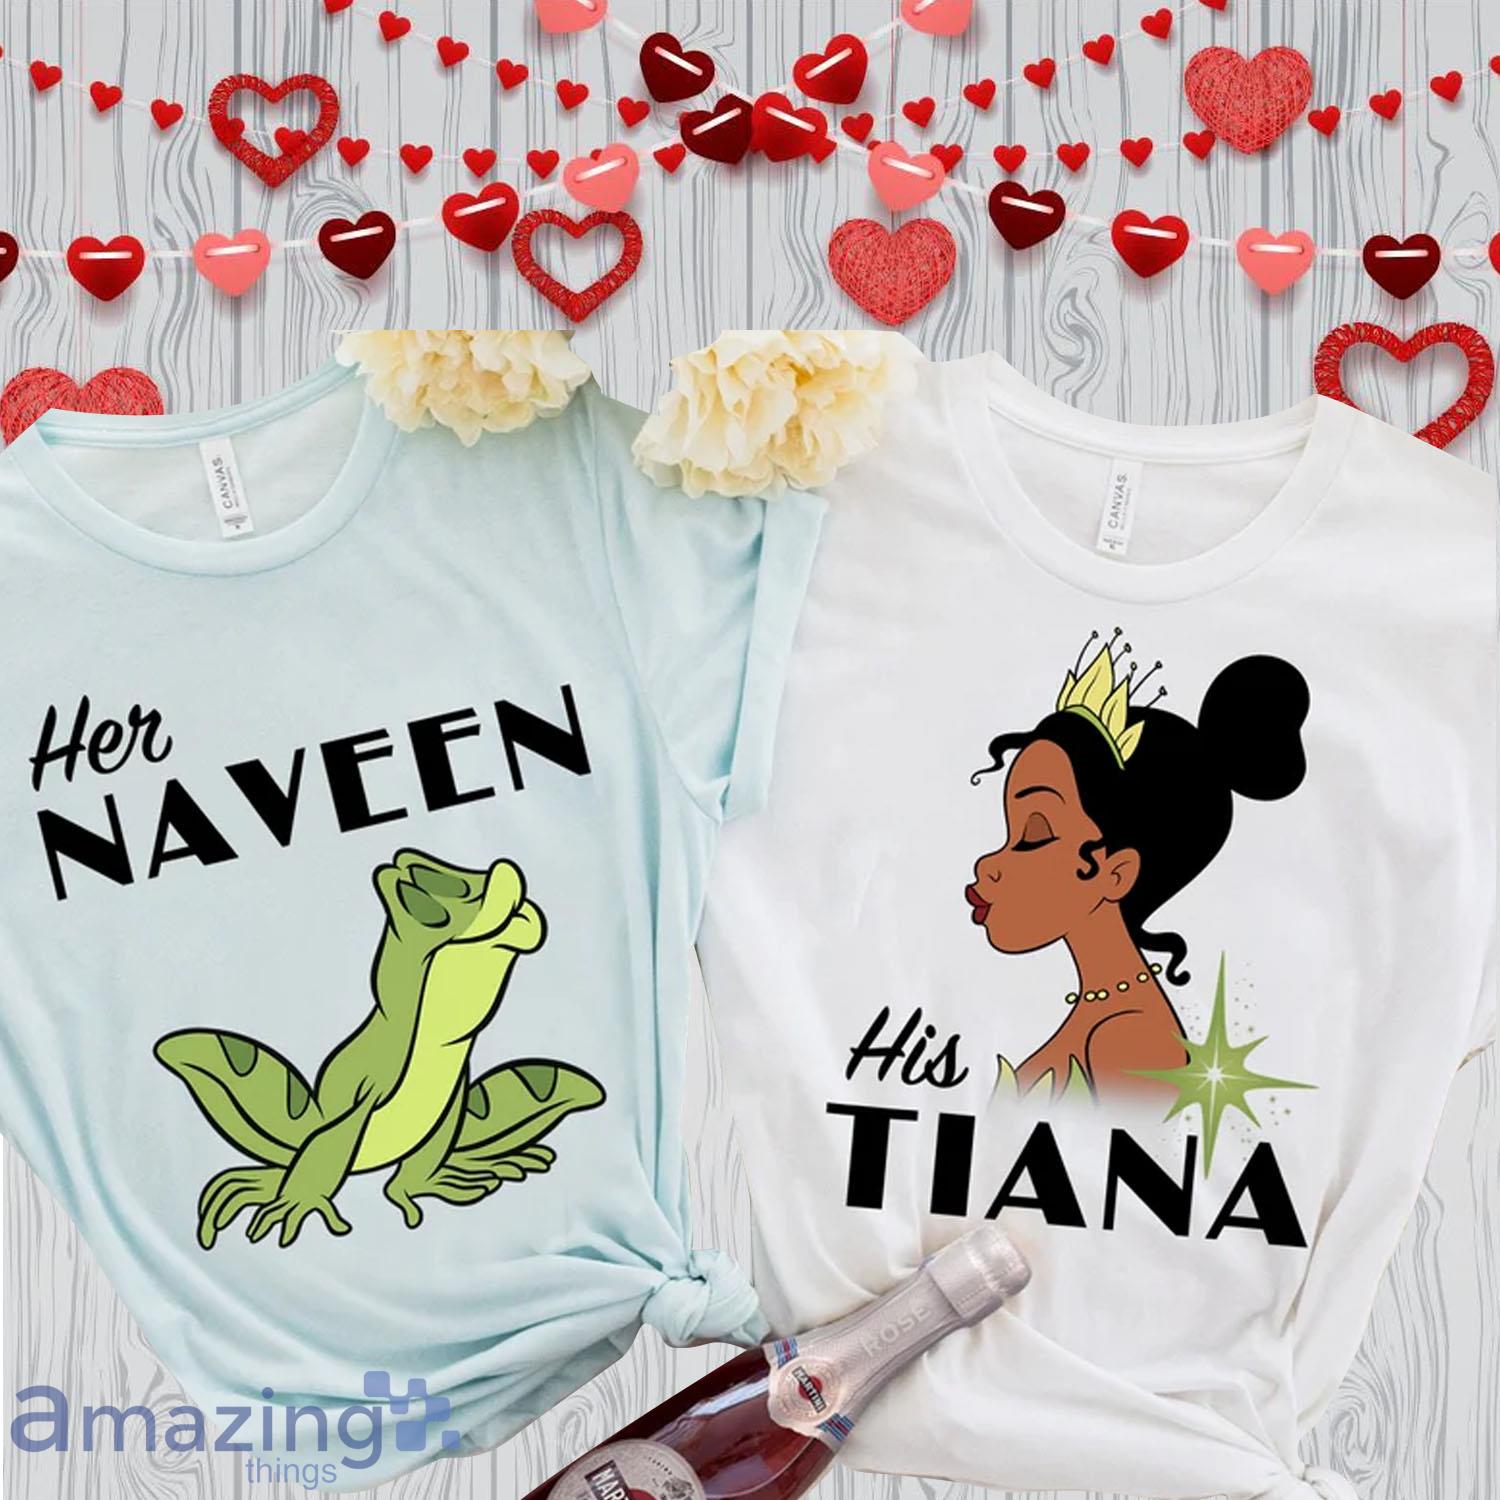 Disney Princess And The Frog Her Naveen And His Tiana Valentines Day Matching Couple Shirt - Disney Princess And The Frog Her Naveen And His Tiana Valentines Day Matching Couple Shirt